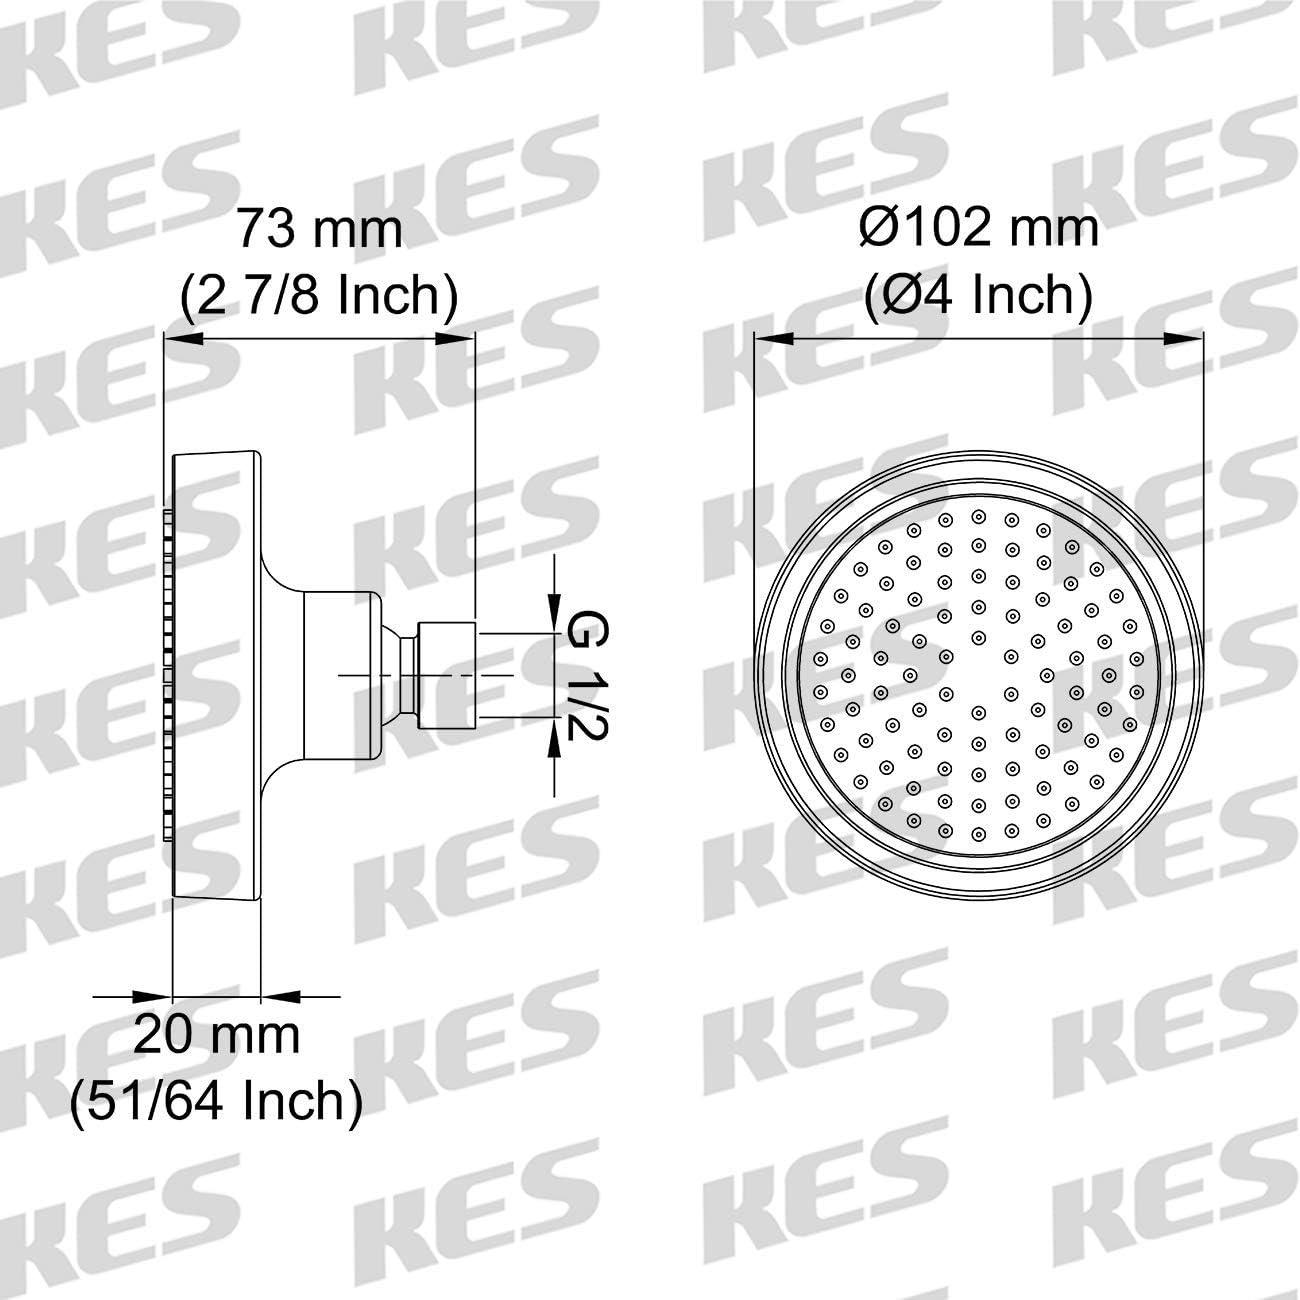 KES Fixed Shower Head 4-Inch Replacement Overhead Rainfall - Massive Discounts